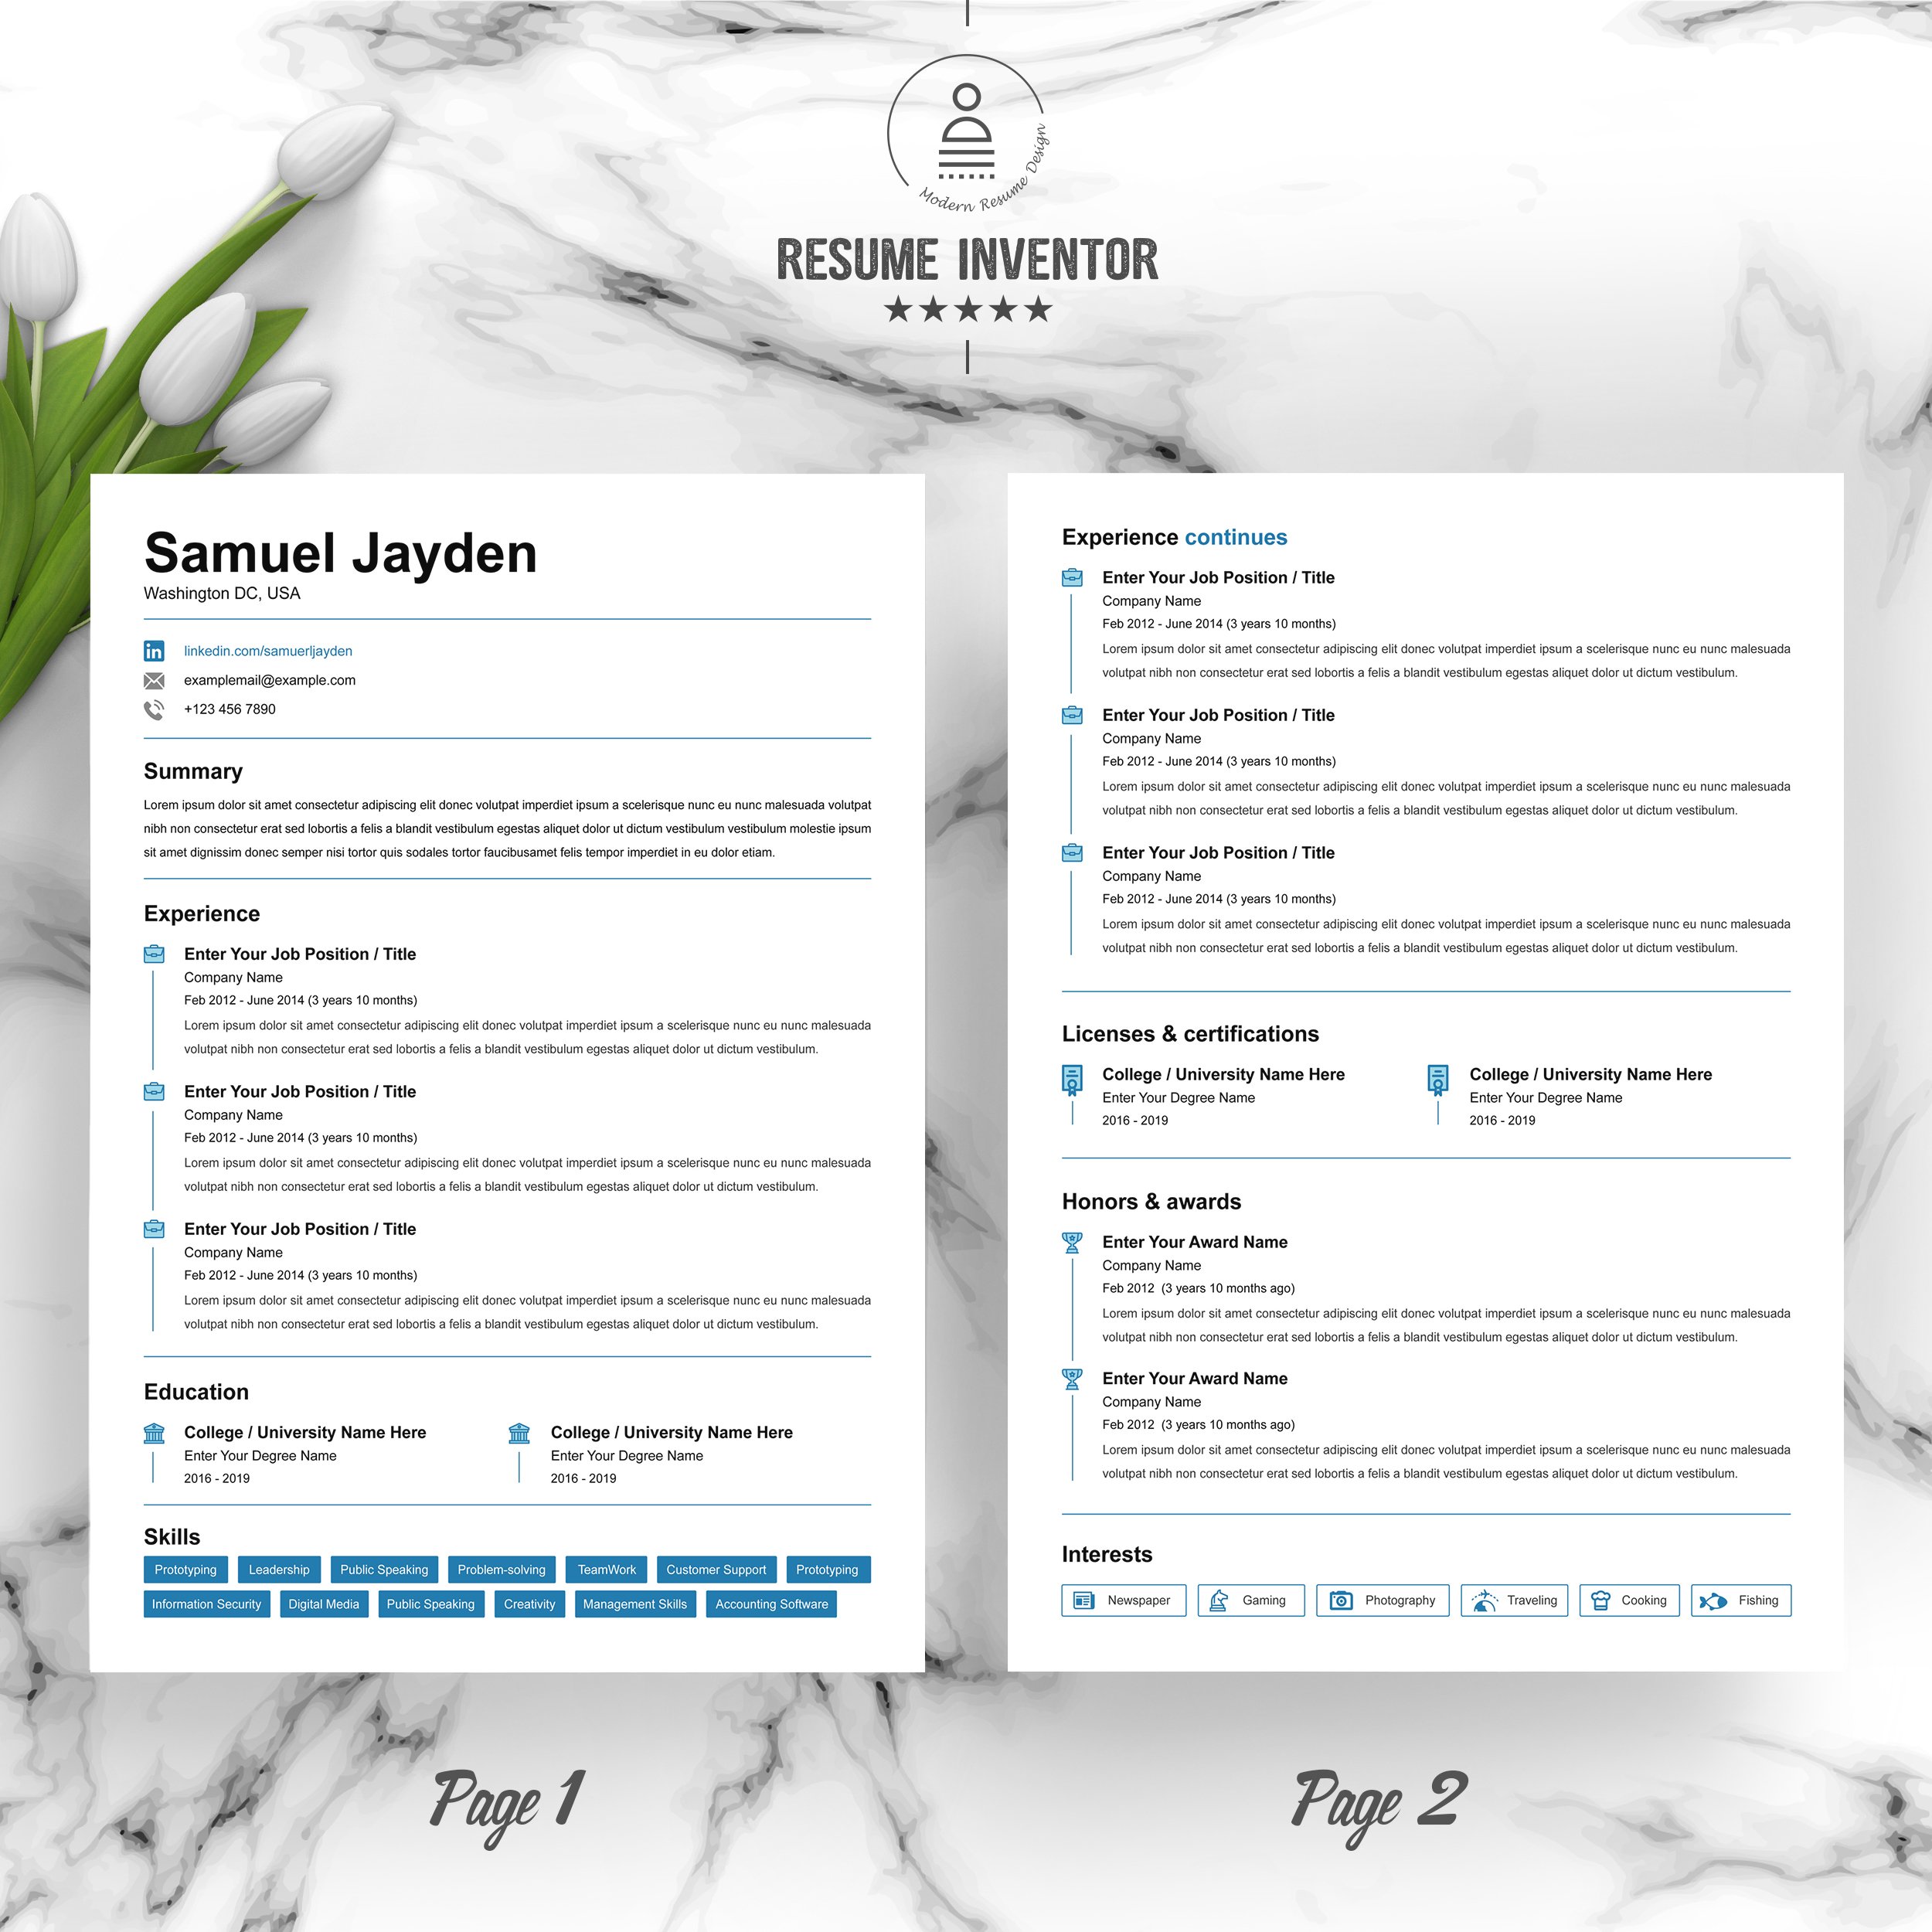 Linkedin Clean Resume Template preview image.